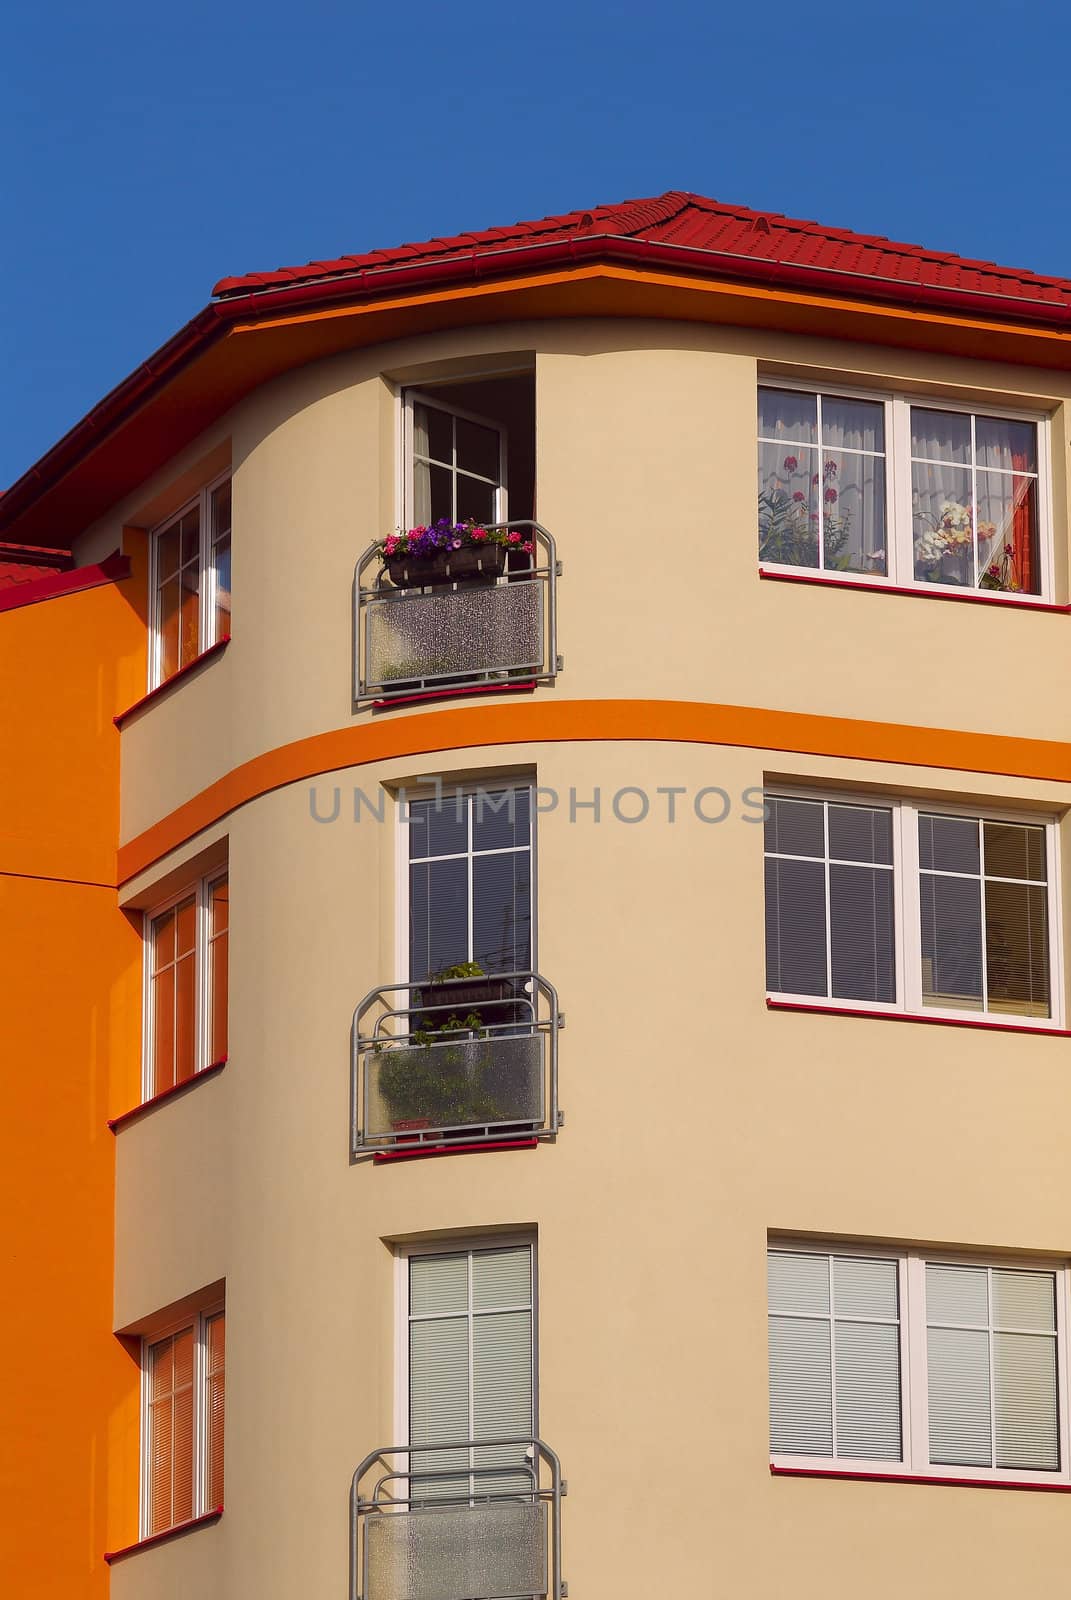 Photo of an apartment house in bright solar morning